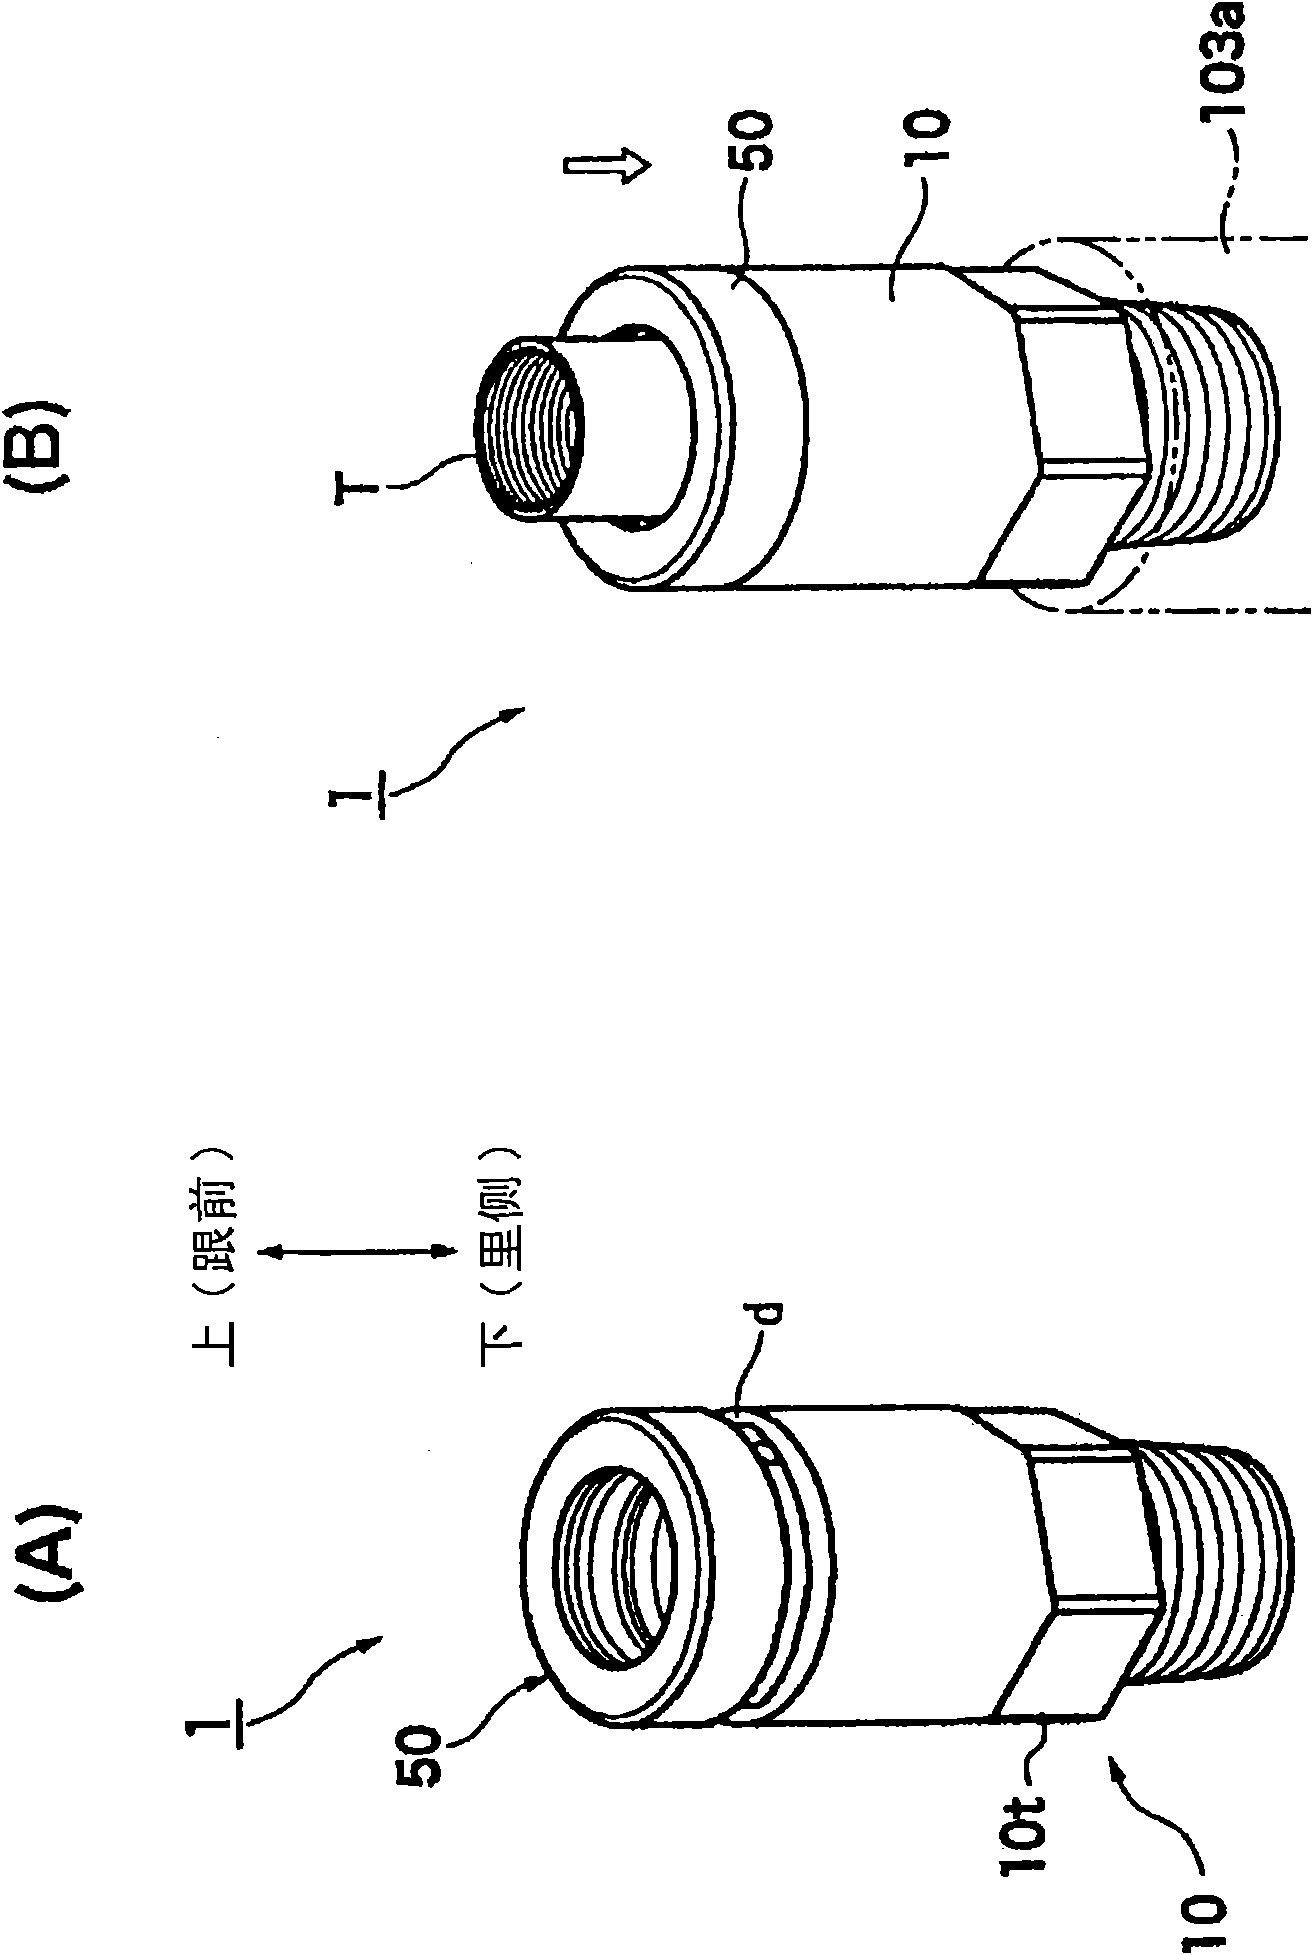 Corrugated pipe joint